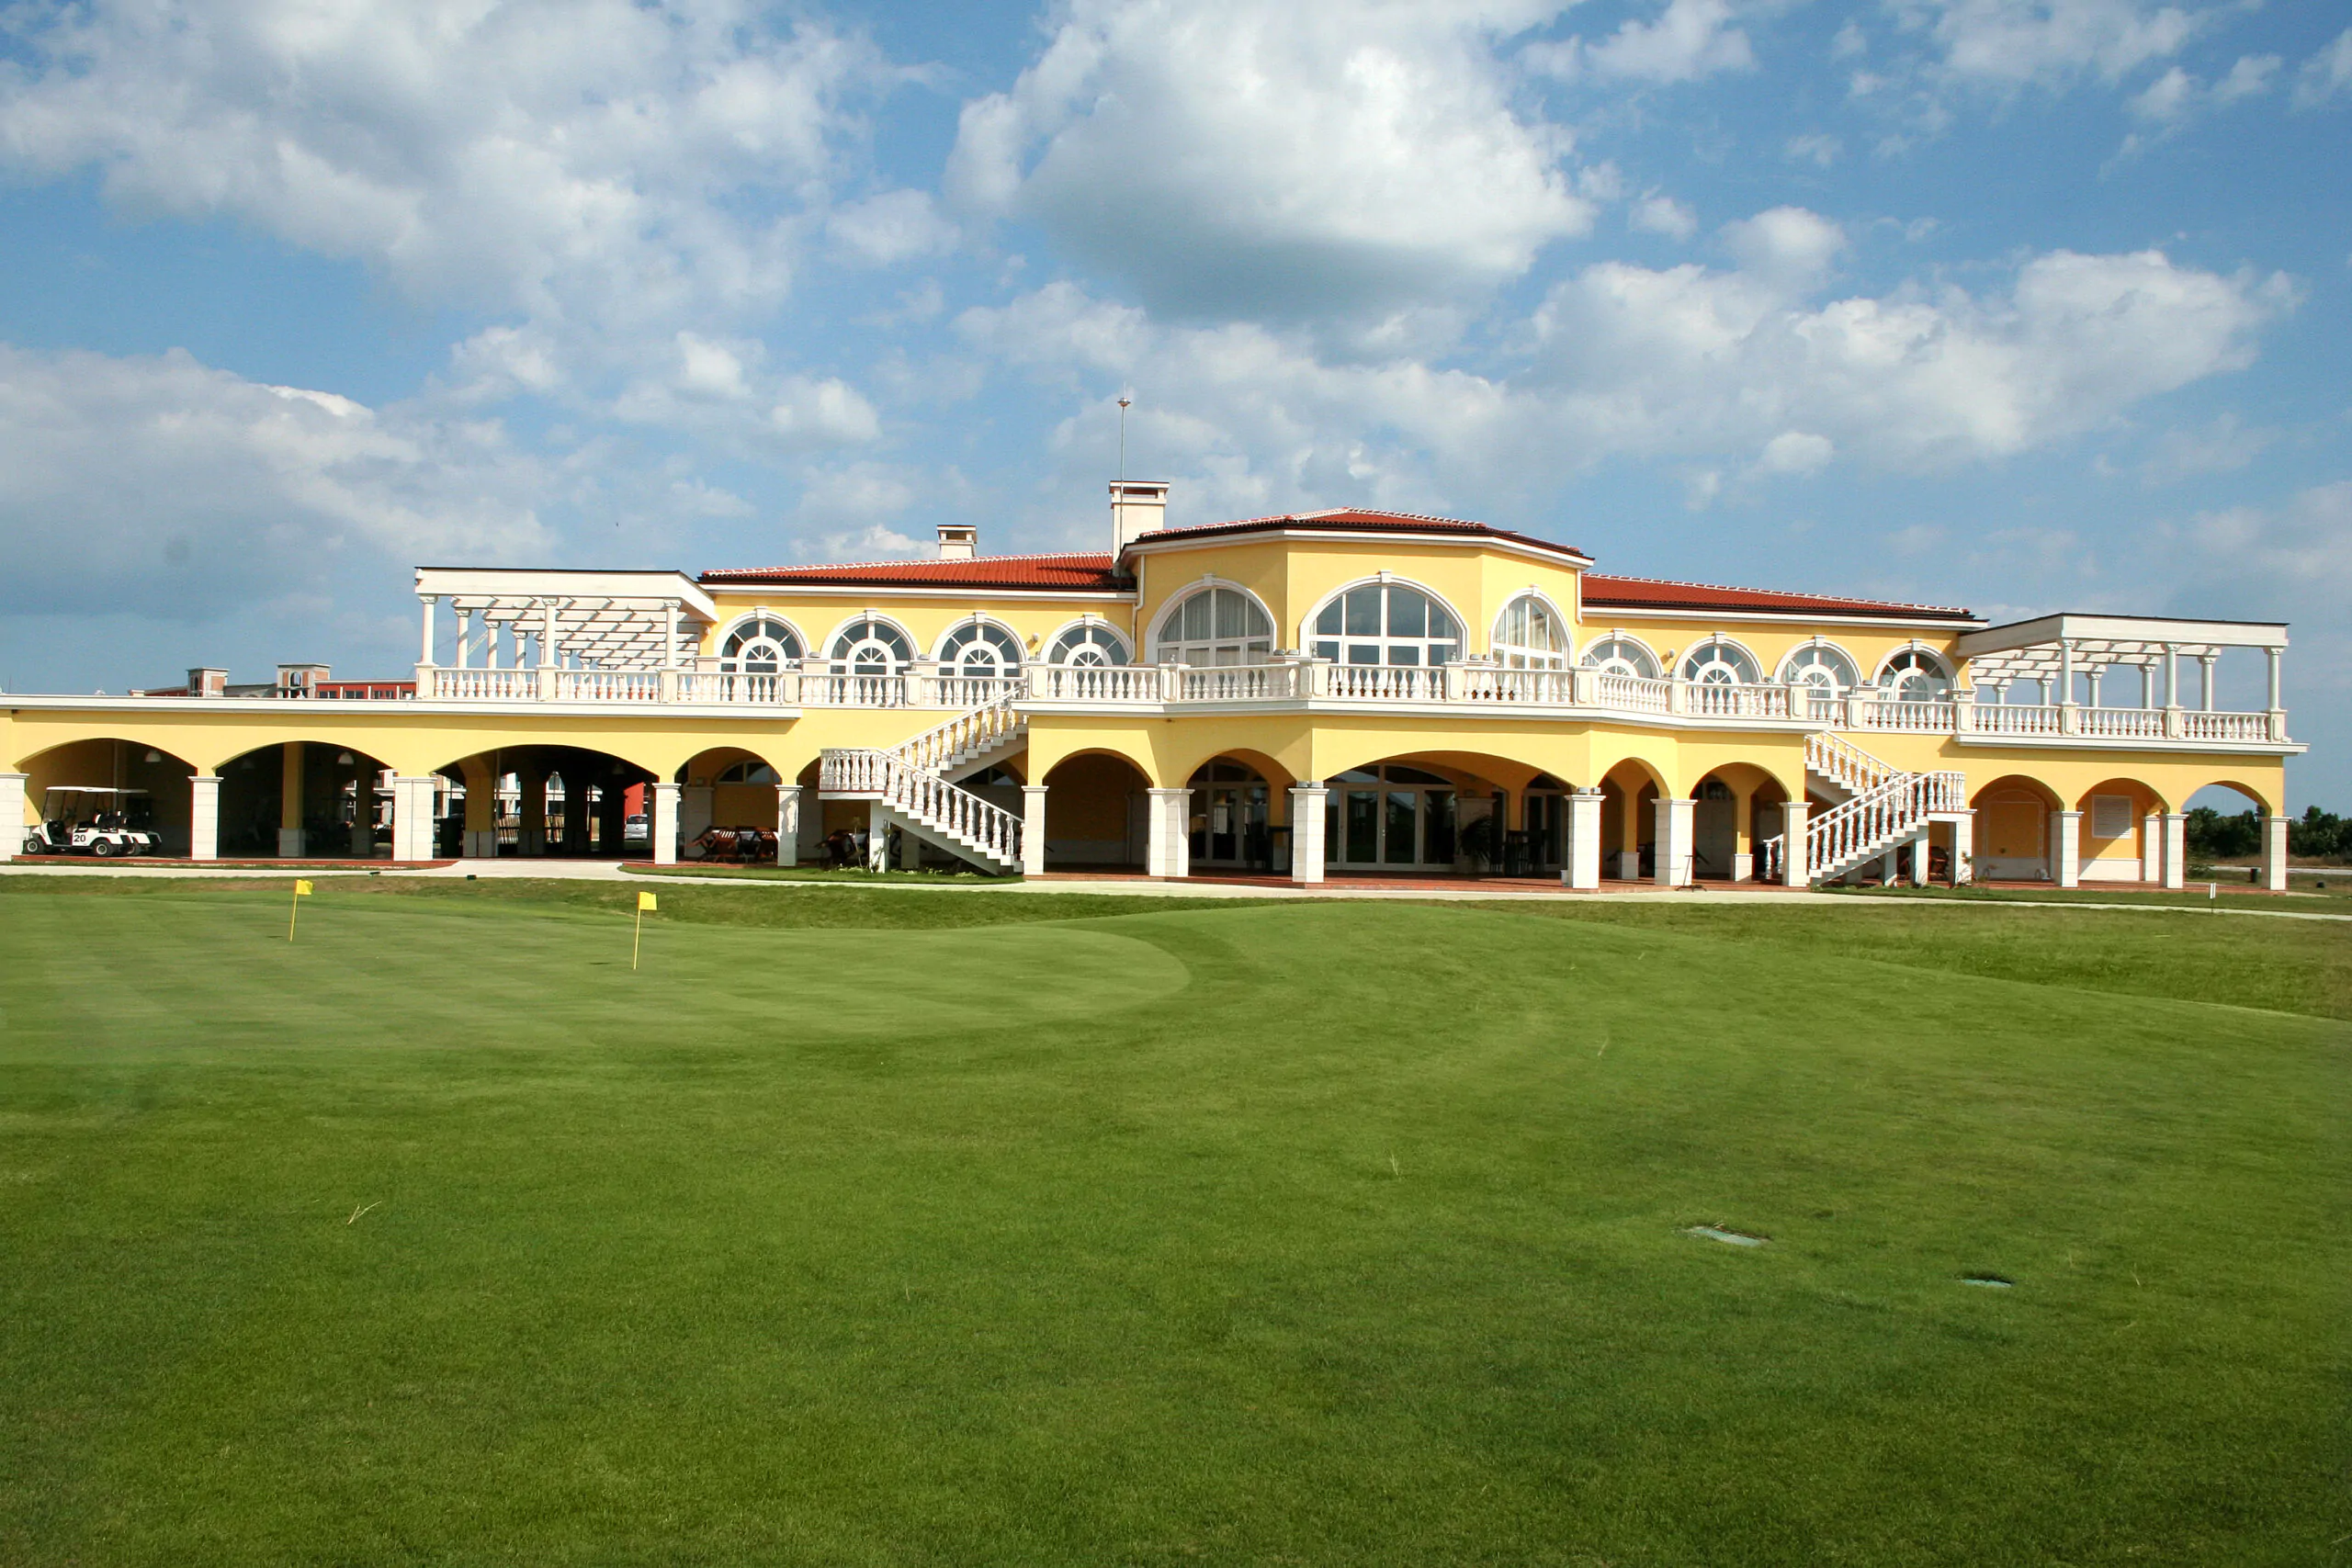 Lighthouse Clubhouse